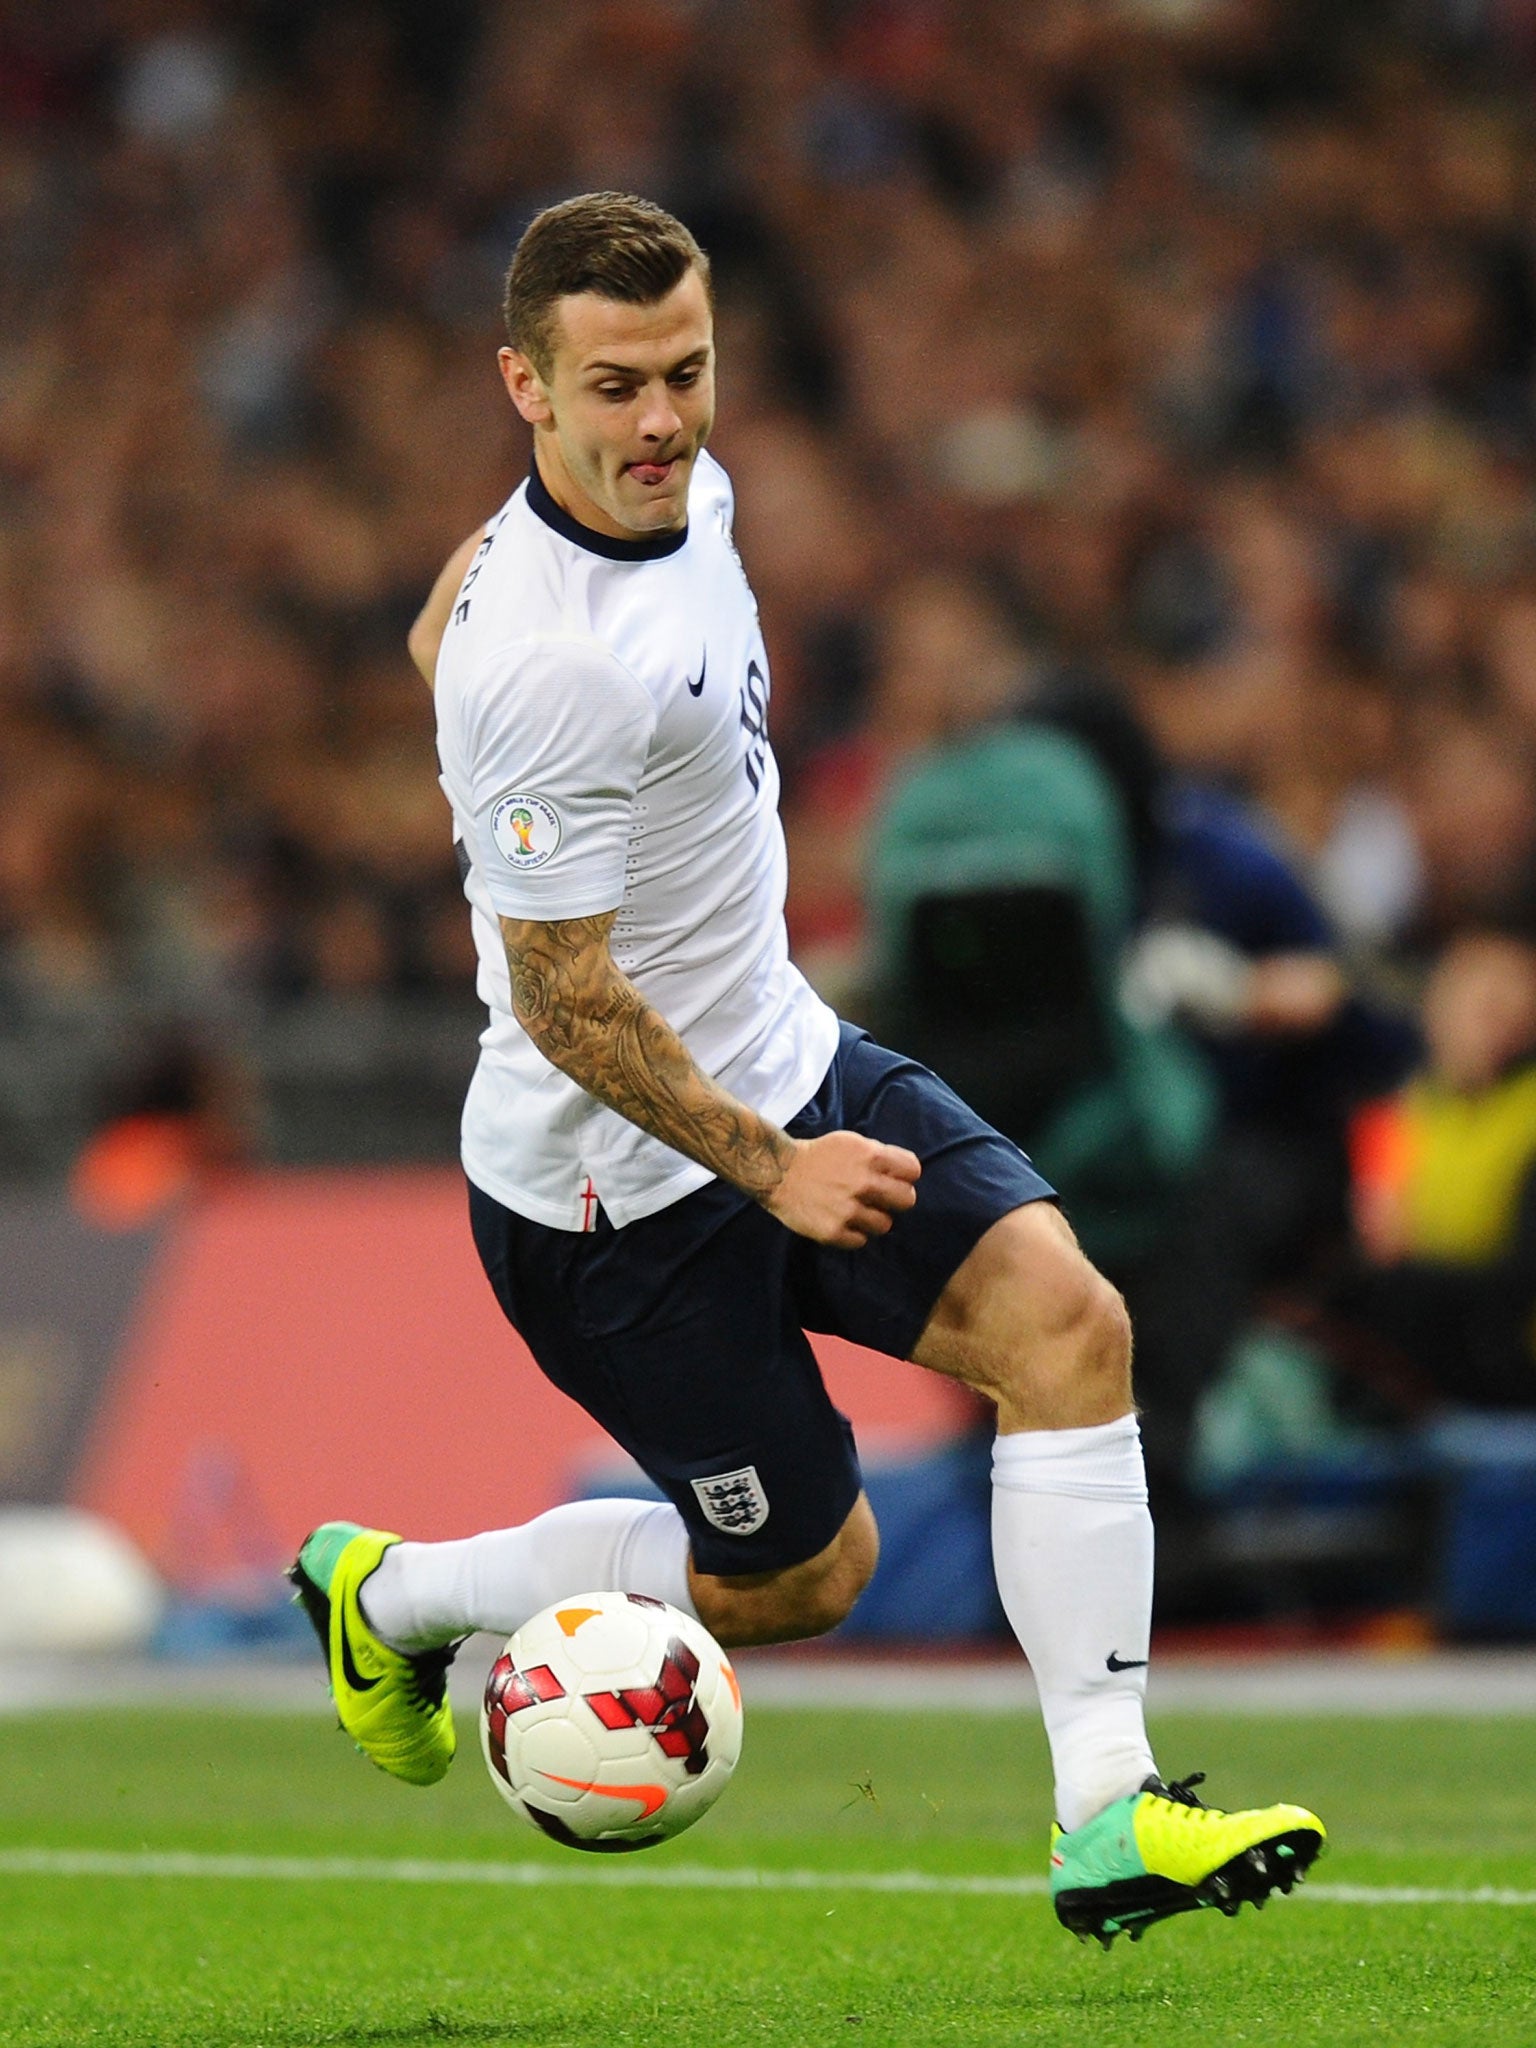 Jack Wilshere will be approaching his prime for England by the time of Euro 2016